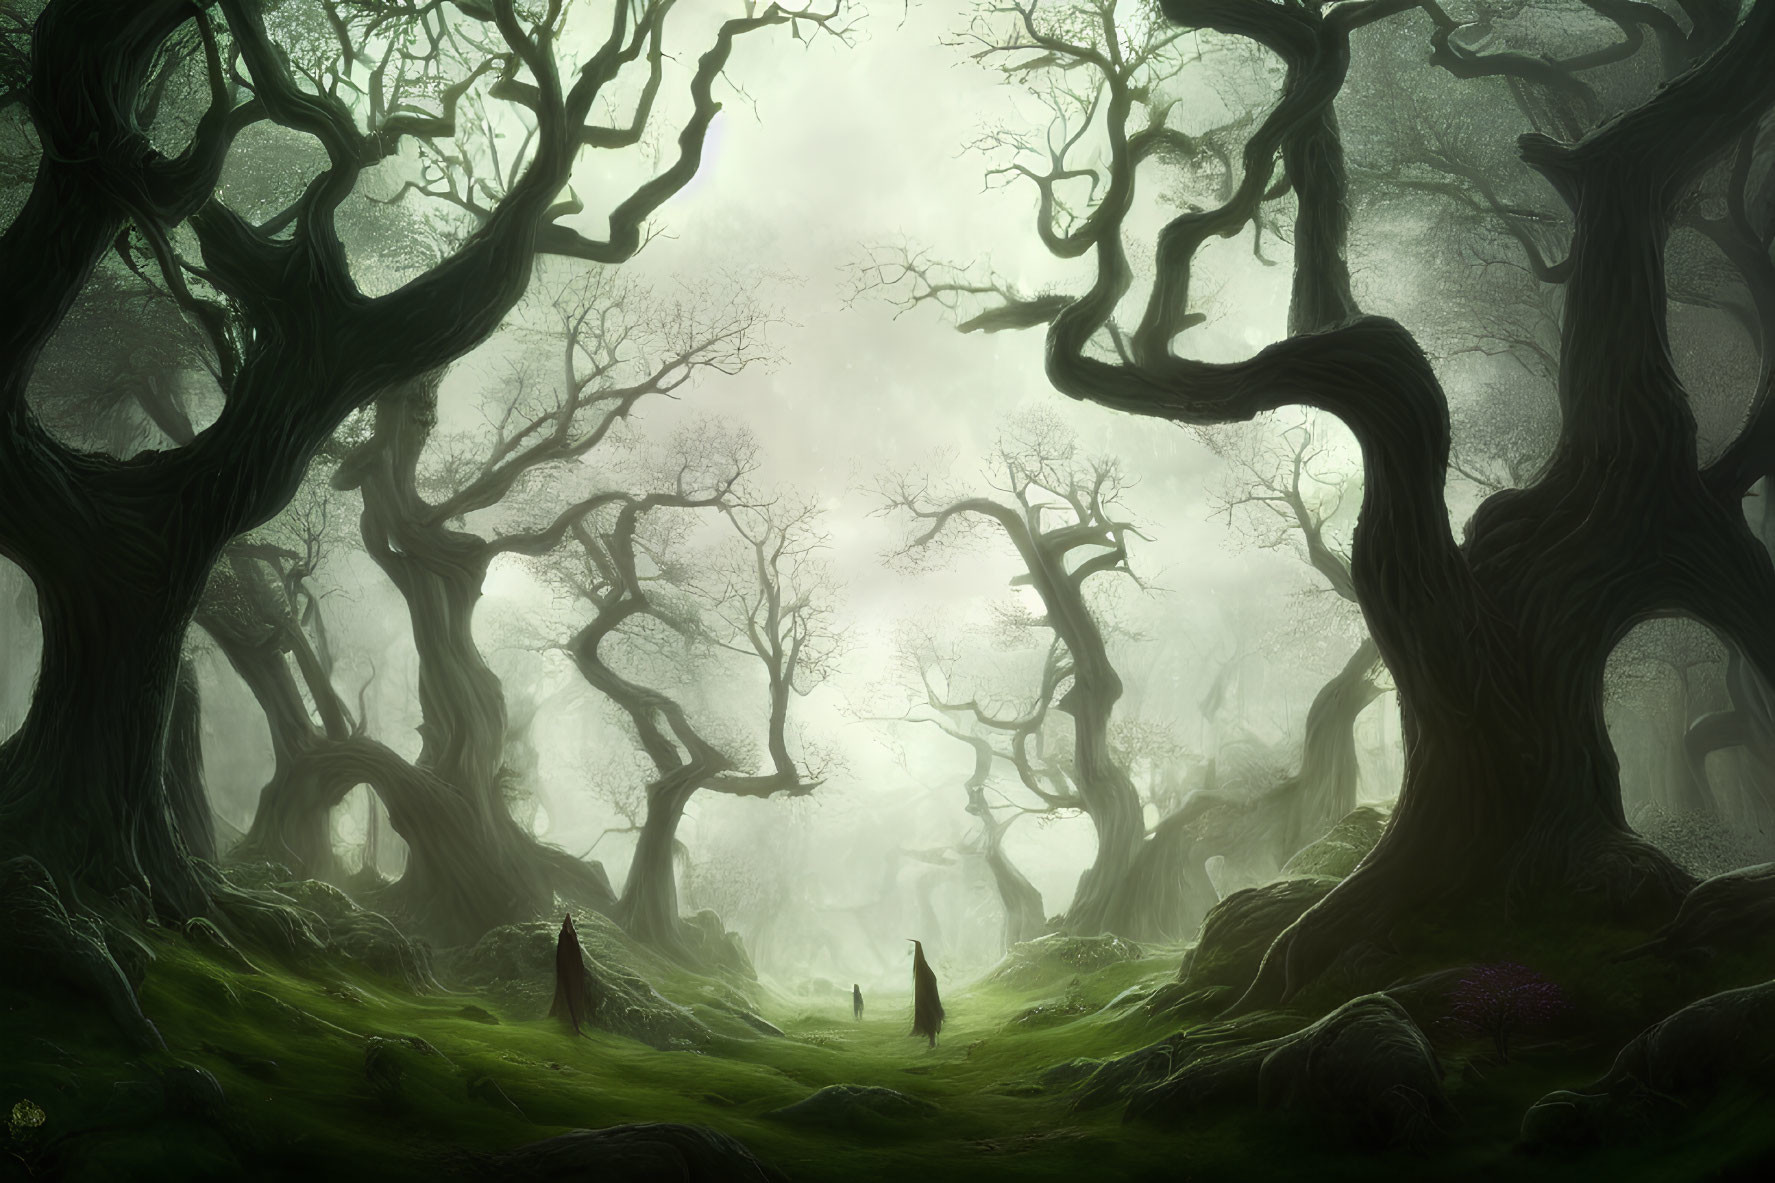 Ethereal forest scene with ancient trees, misty backdrop, and cloaked figures.